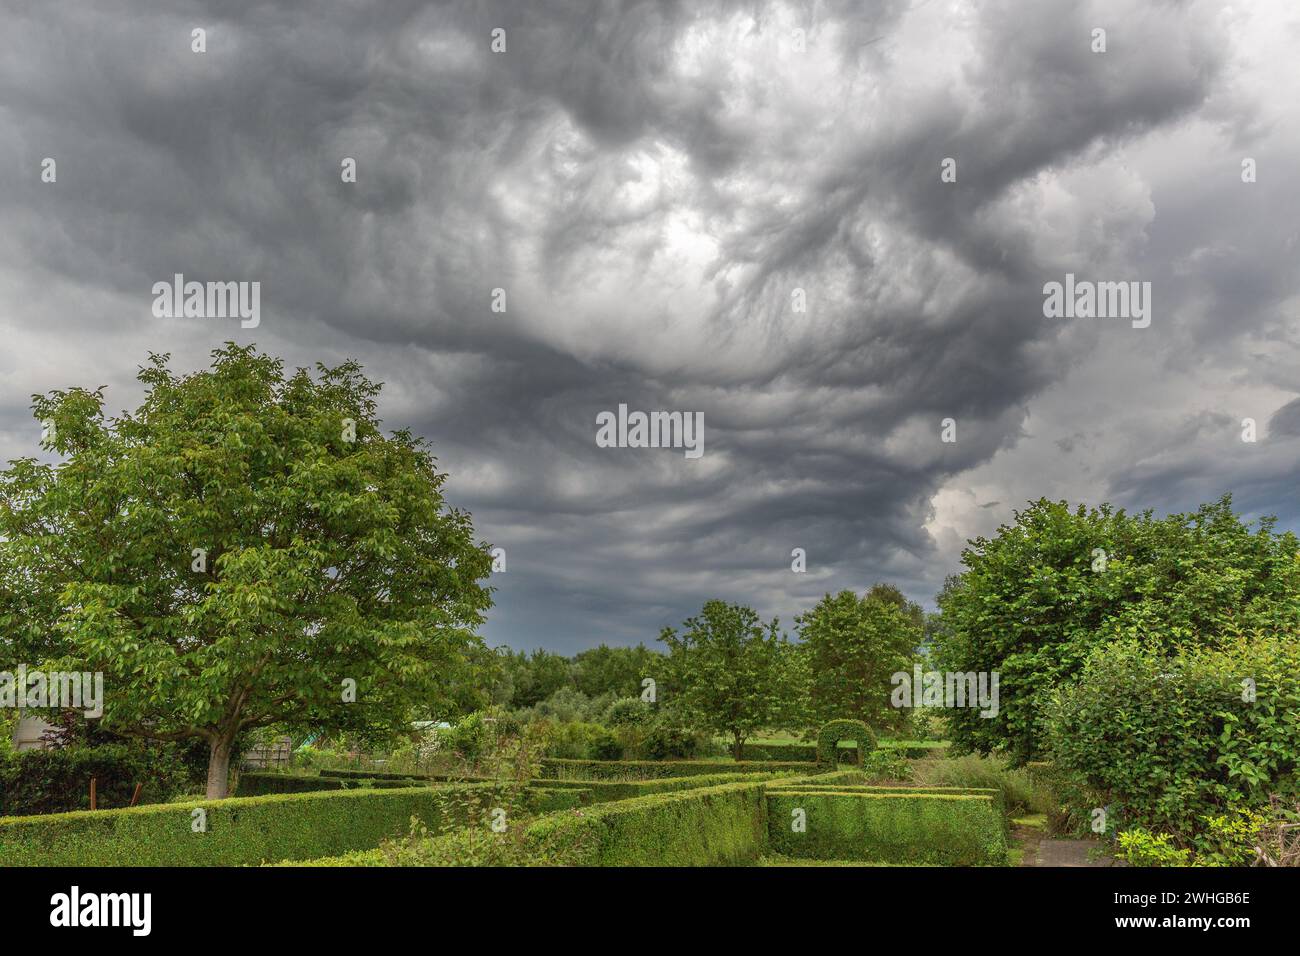 Storm approaching over a green garden on a summer afternoon Stock Photo